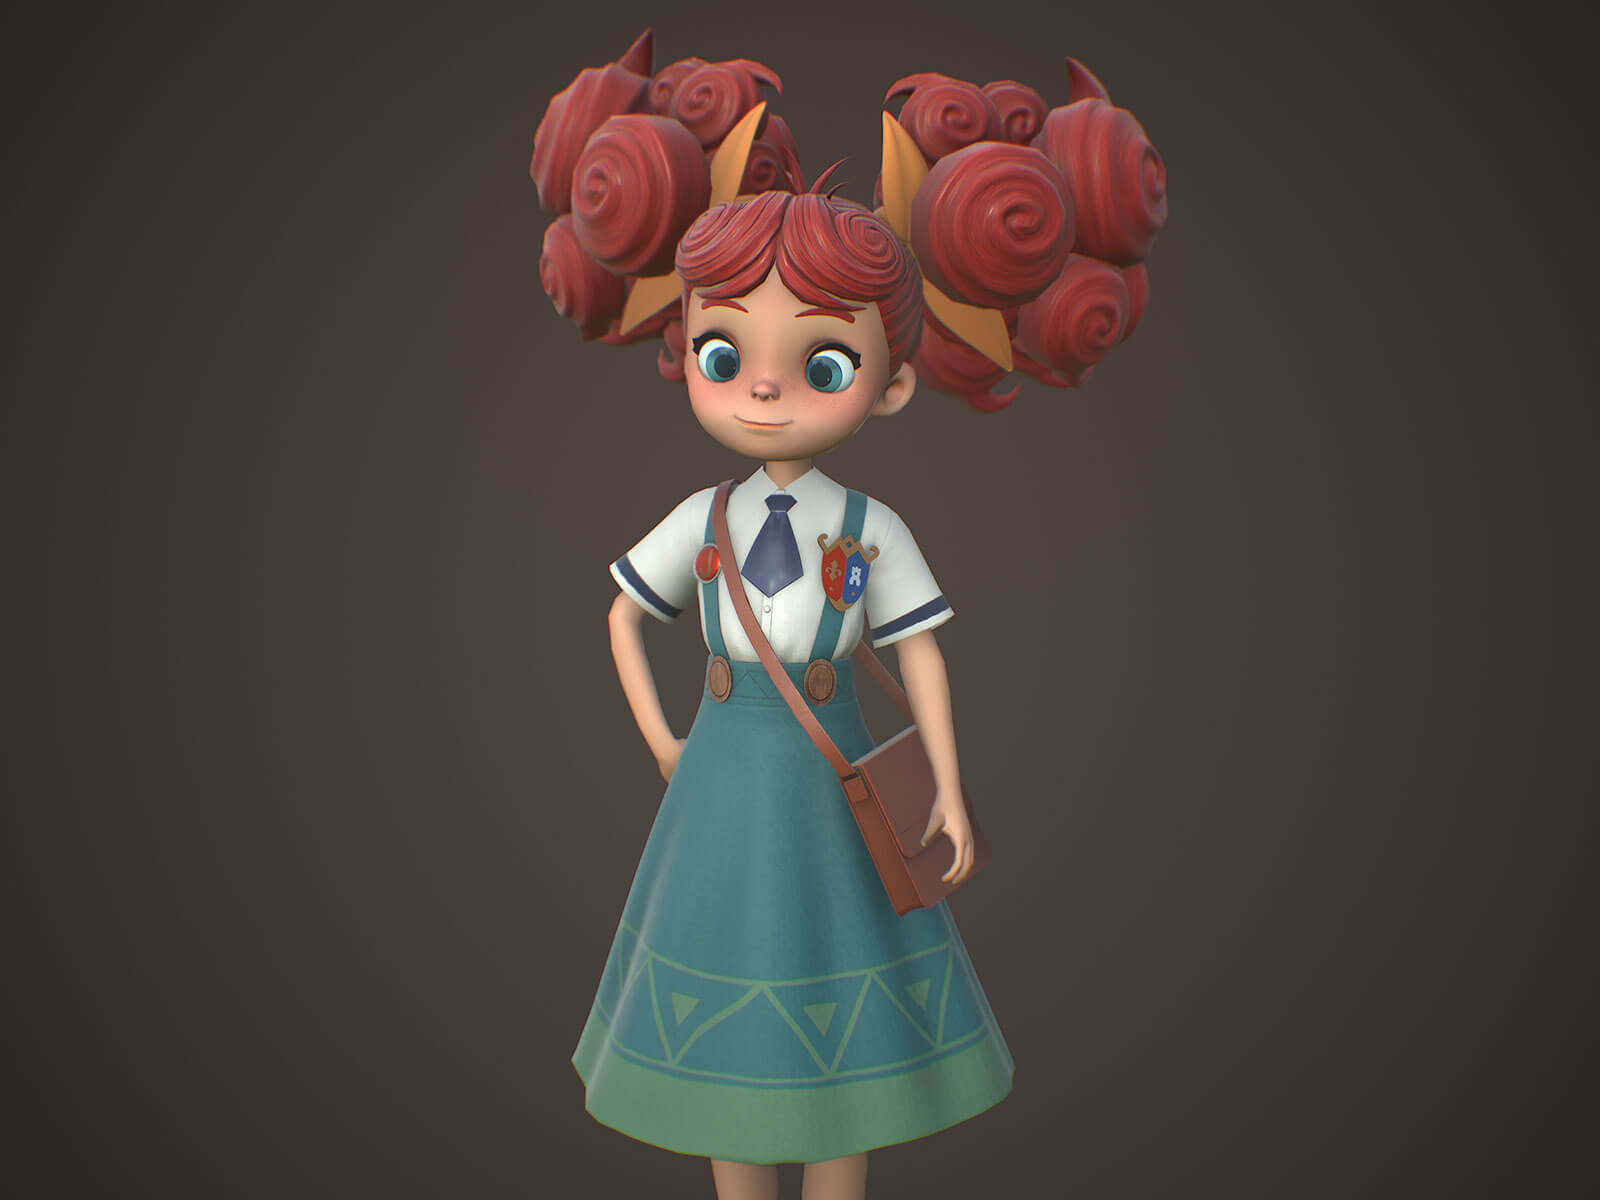 A young school girl with eccentric red hair wears a school uniform and a purse